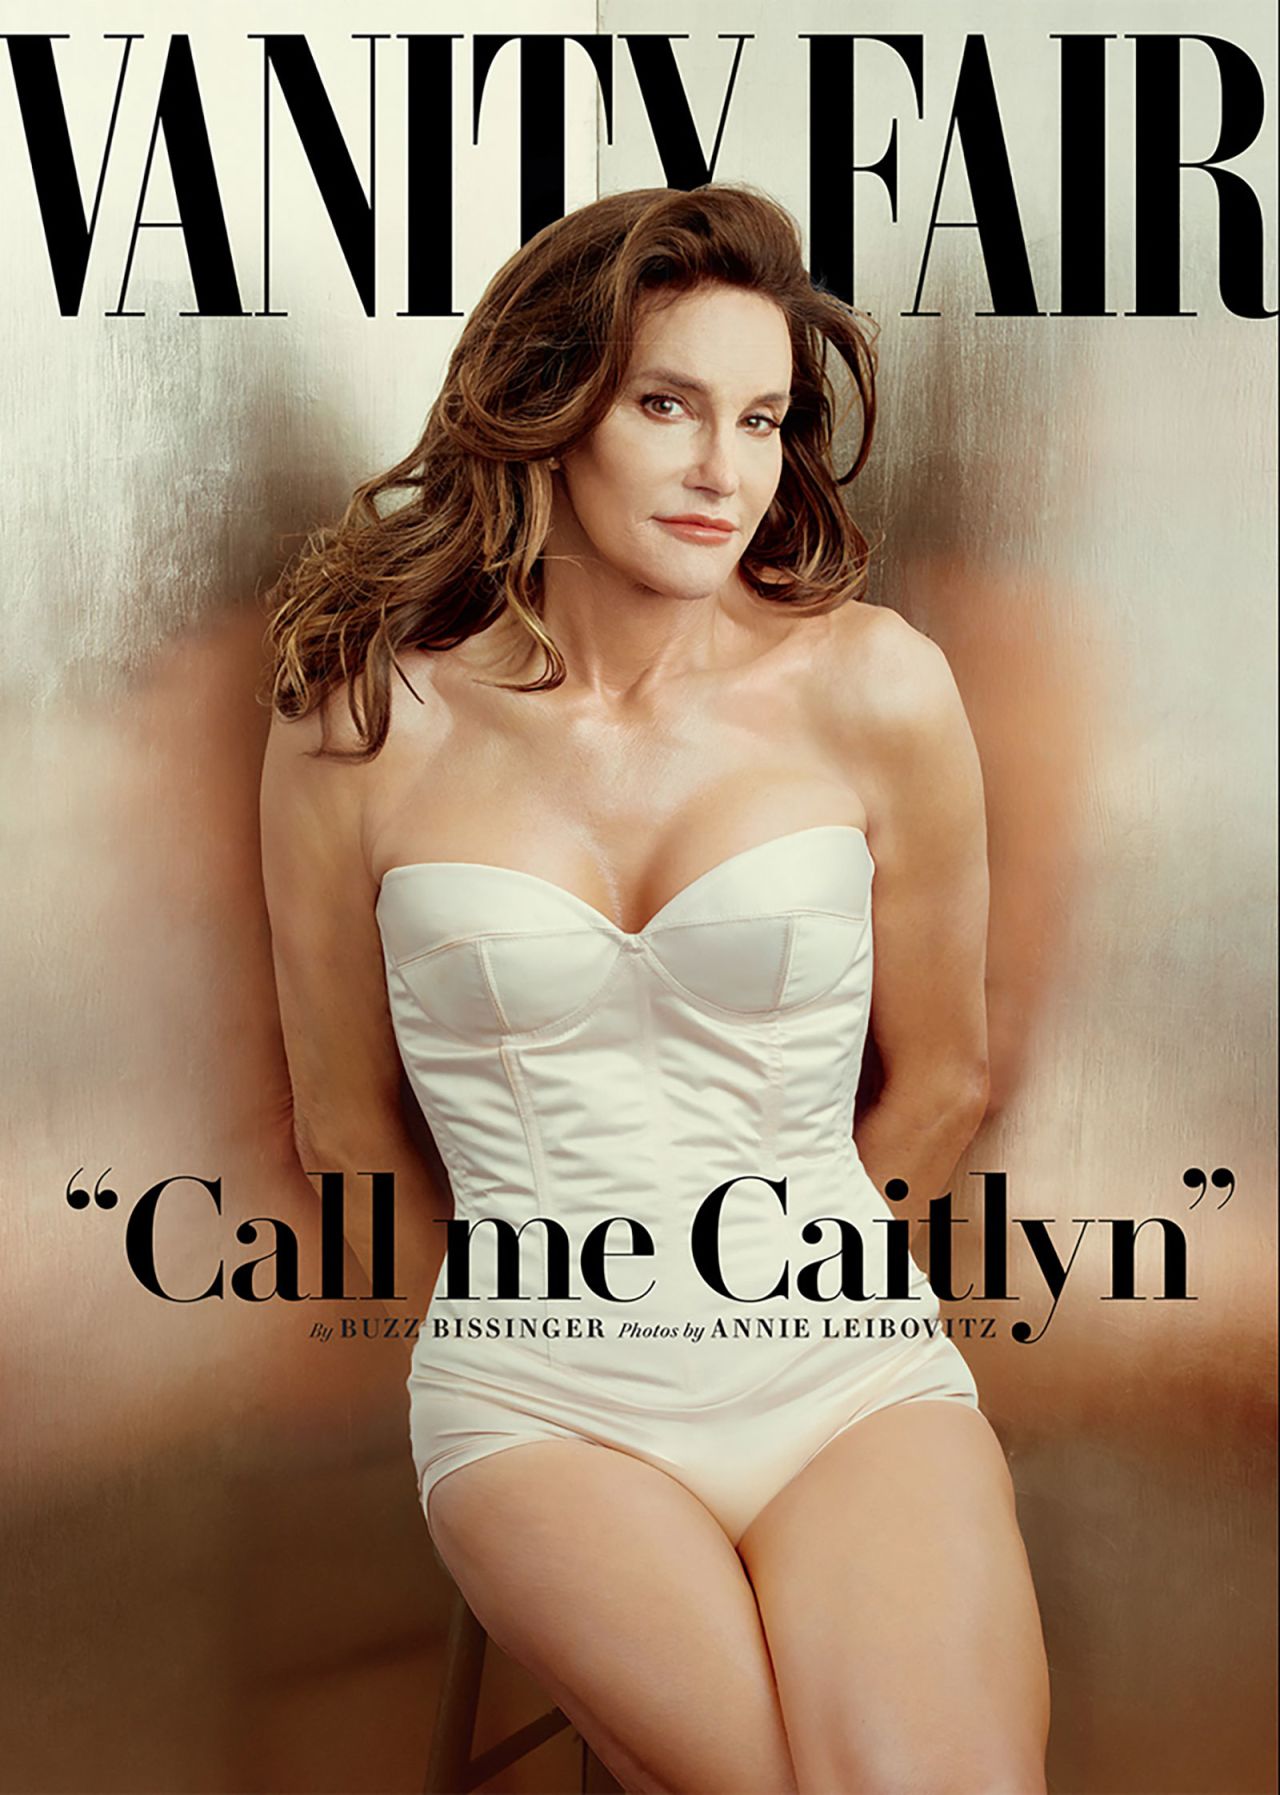 Vanity Fair <a href="http://www.cnn.com/2015/06/01/entertainment/bruce-caitlyn-jenner-vanity-fair-feat/index.html">unveiled its Jenner cover</a> shot by famed photographer Annie Leibovitz in June 2015.